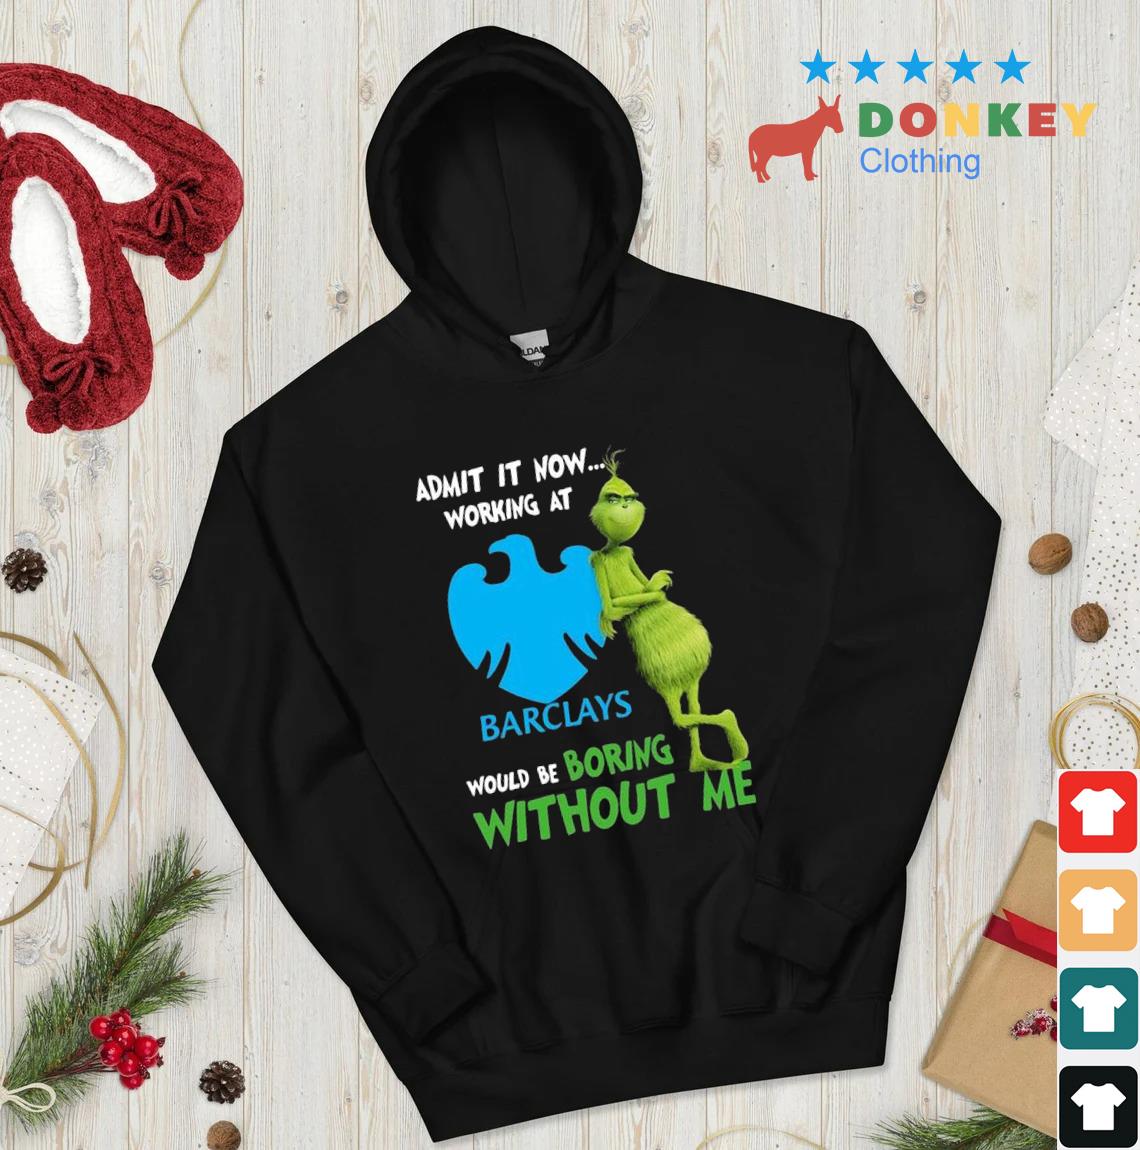 The Grinch Admit It Now Working At Barclays Would Be Boring Without Me Shirt hoodie don den